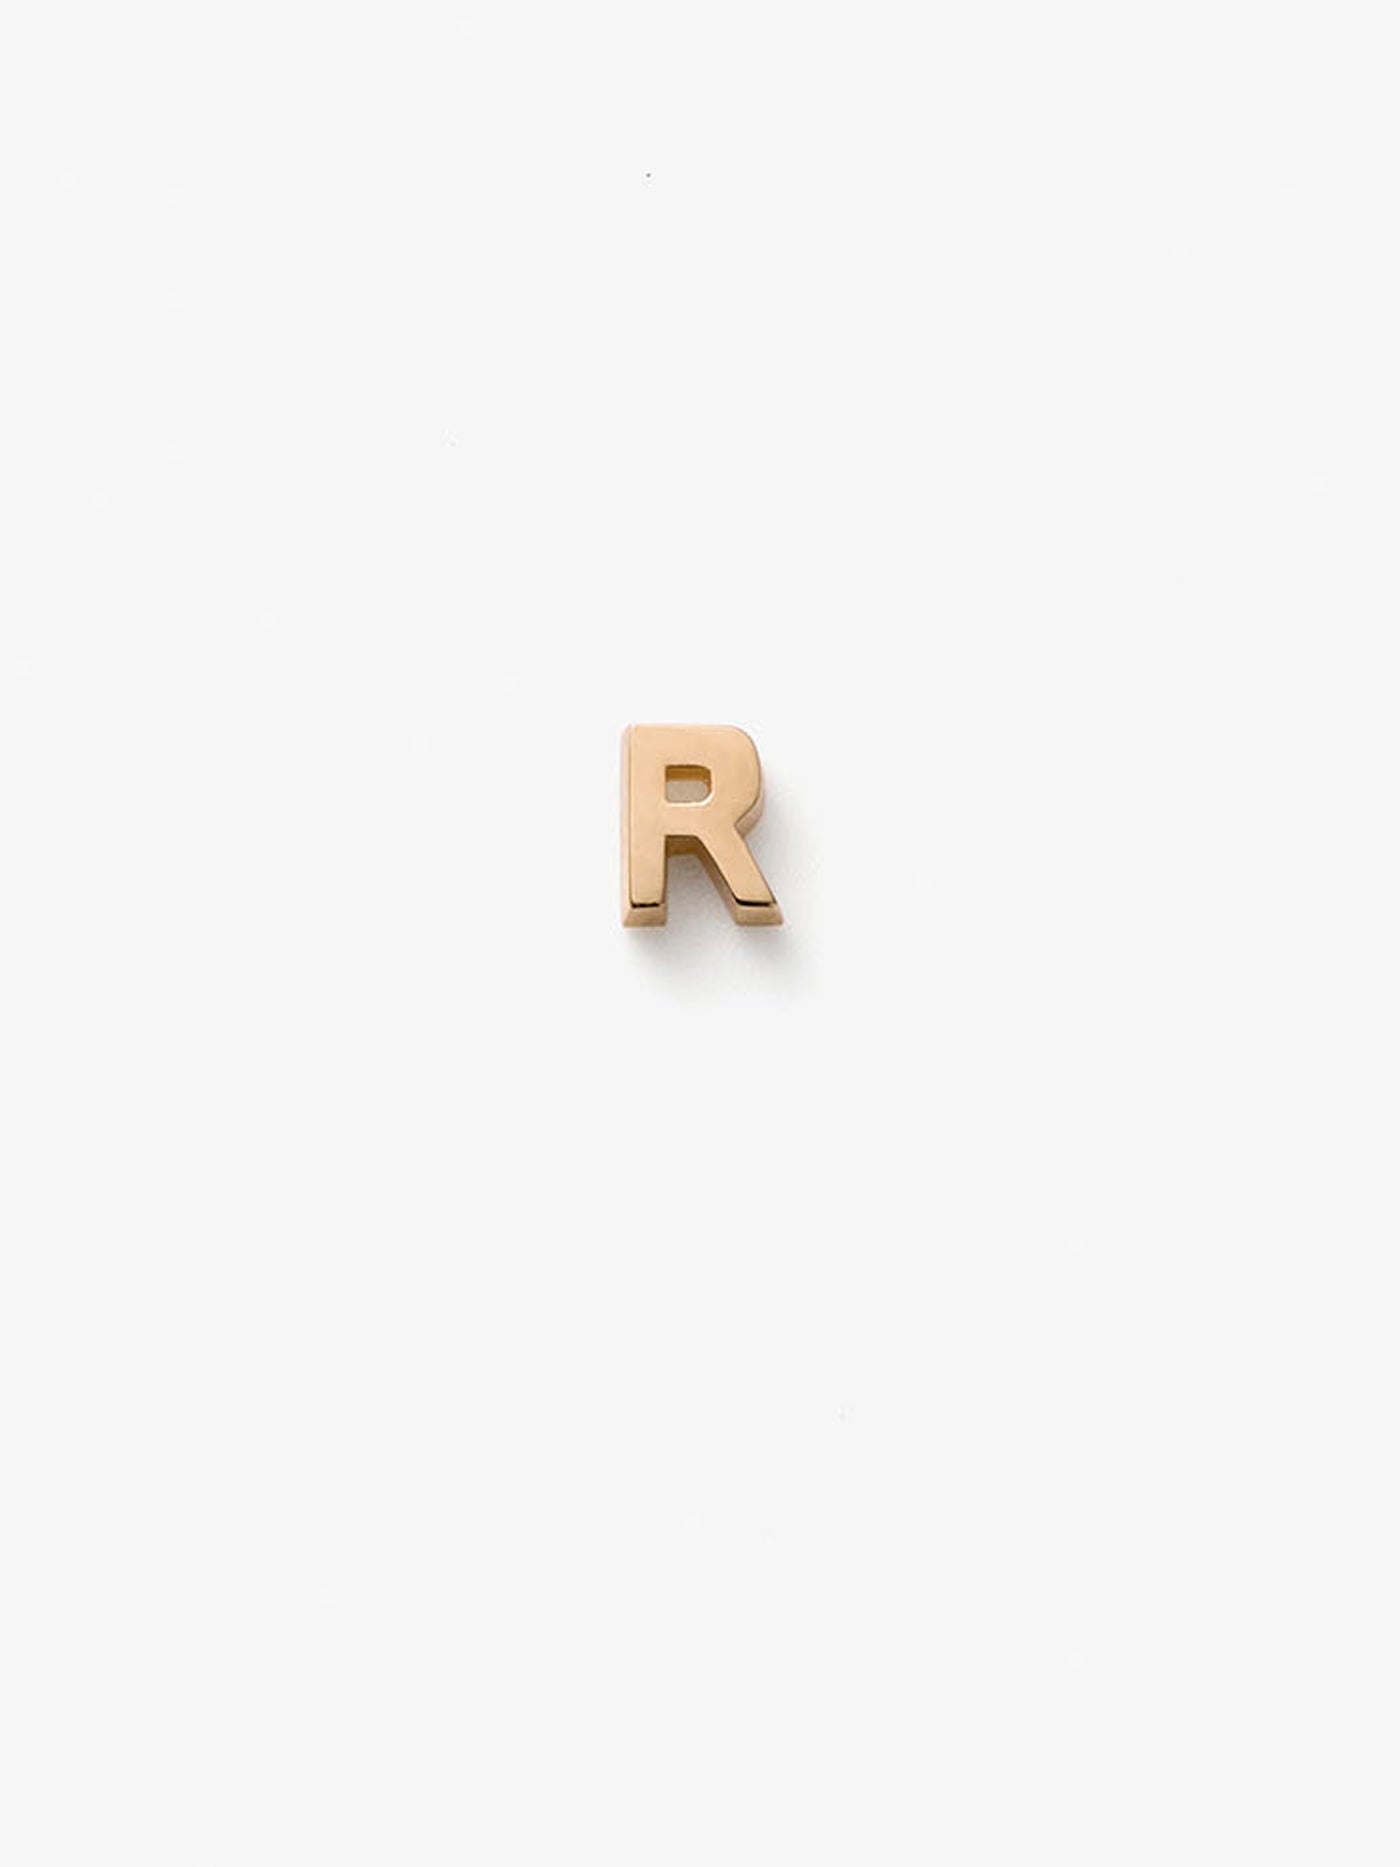 One Letter R in 18k Gold